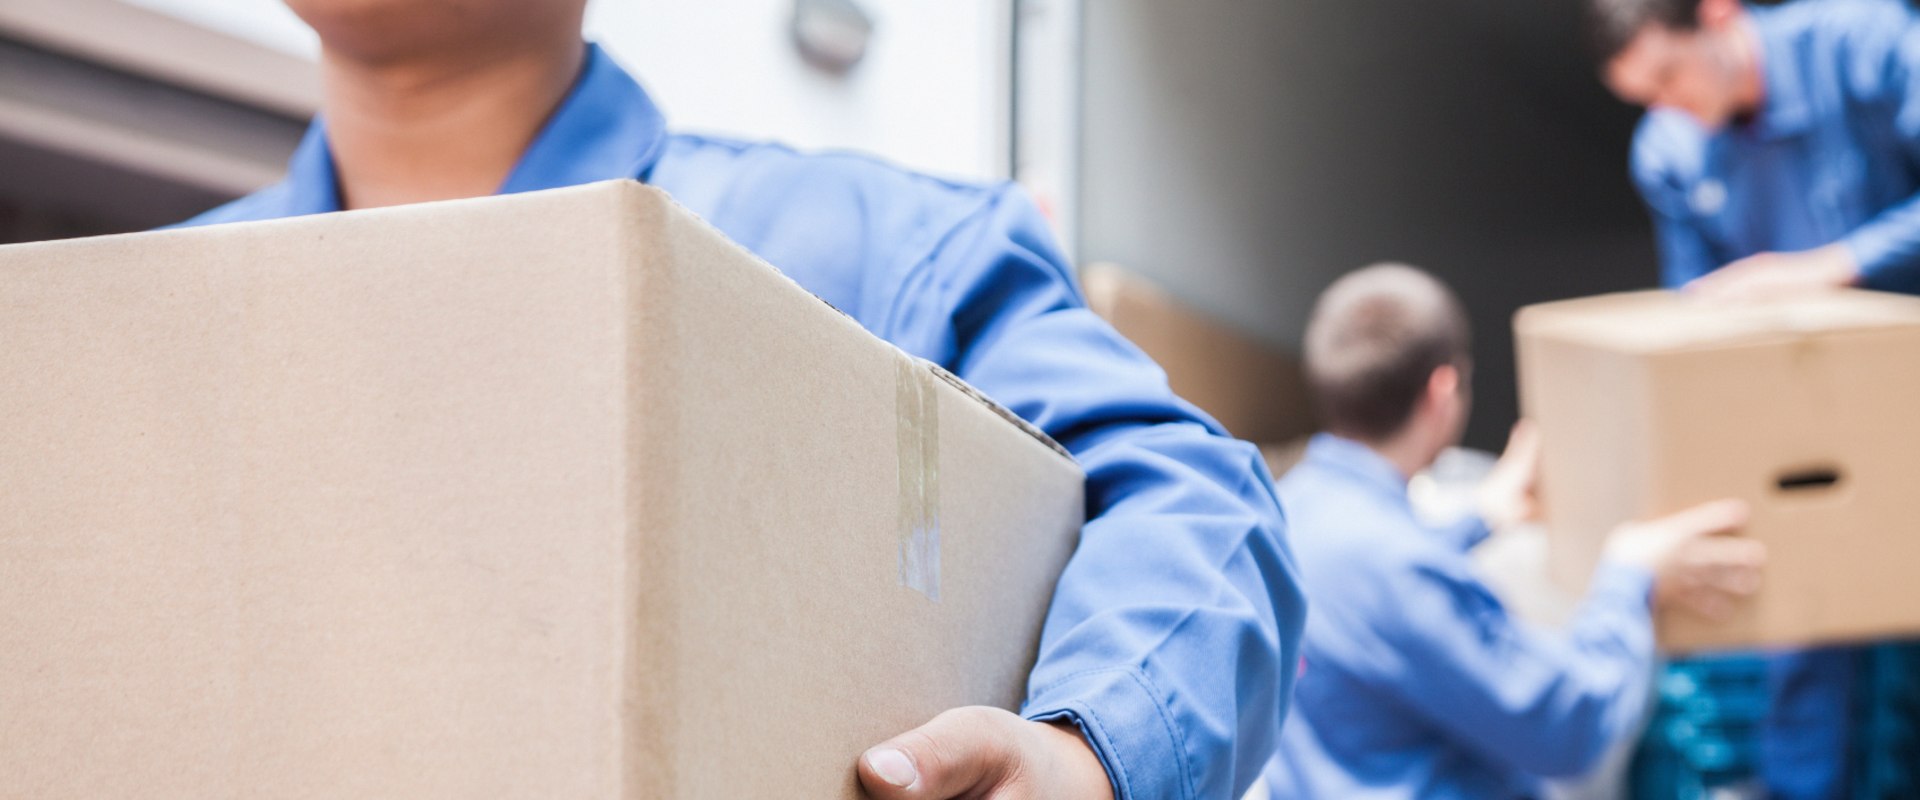 Professional Movers: Liability Coverage Explained